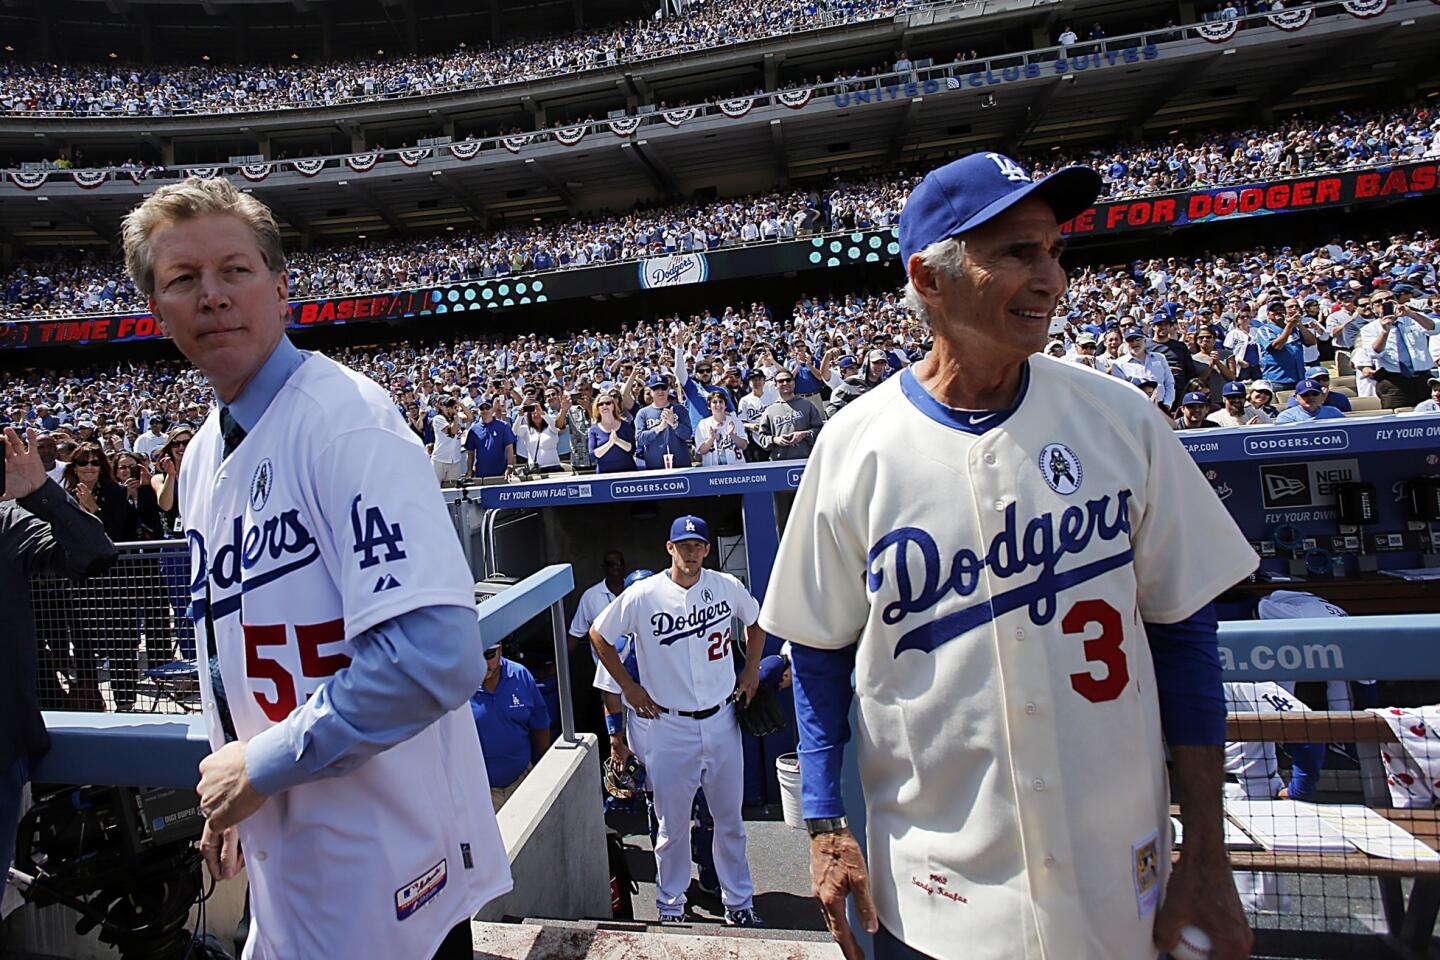 Sandy Koufax to be honored with statue at Dodger Stadium - NBC Sports